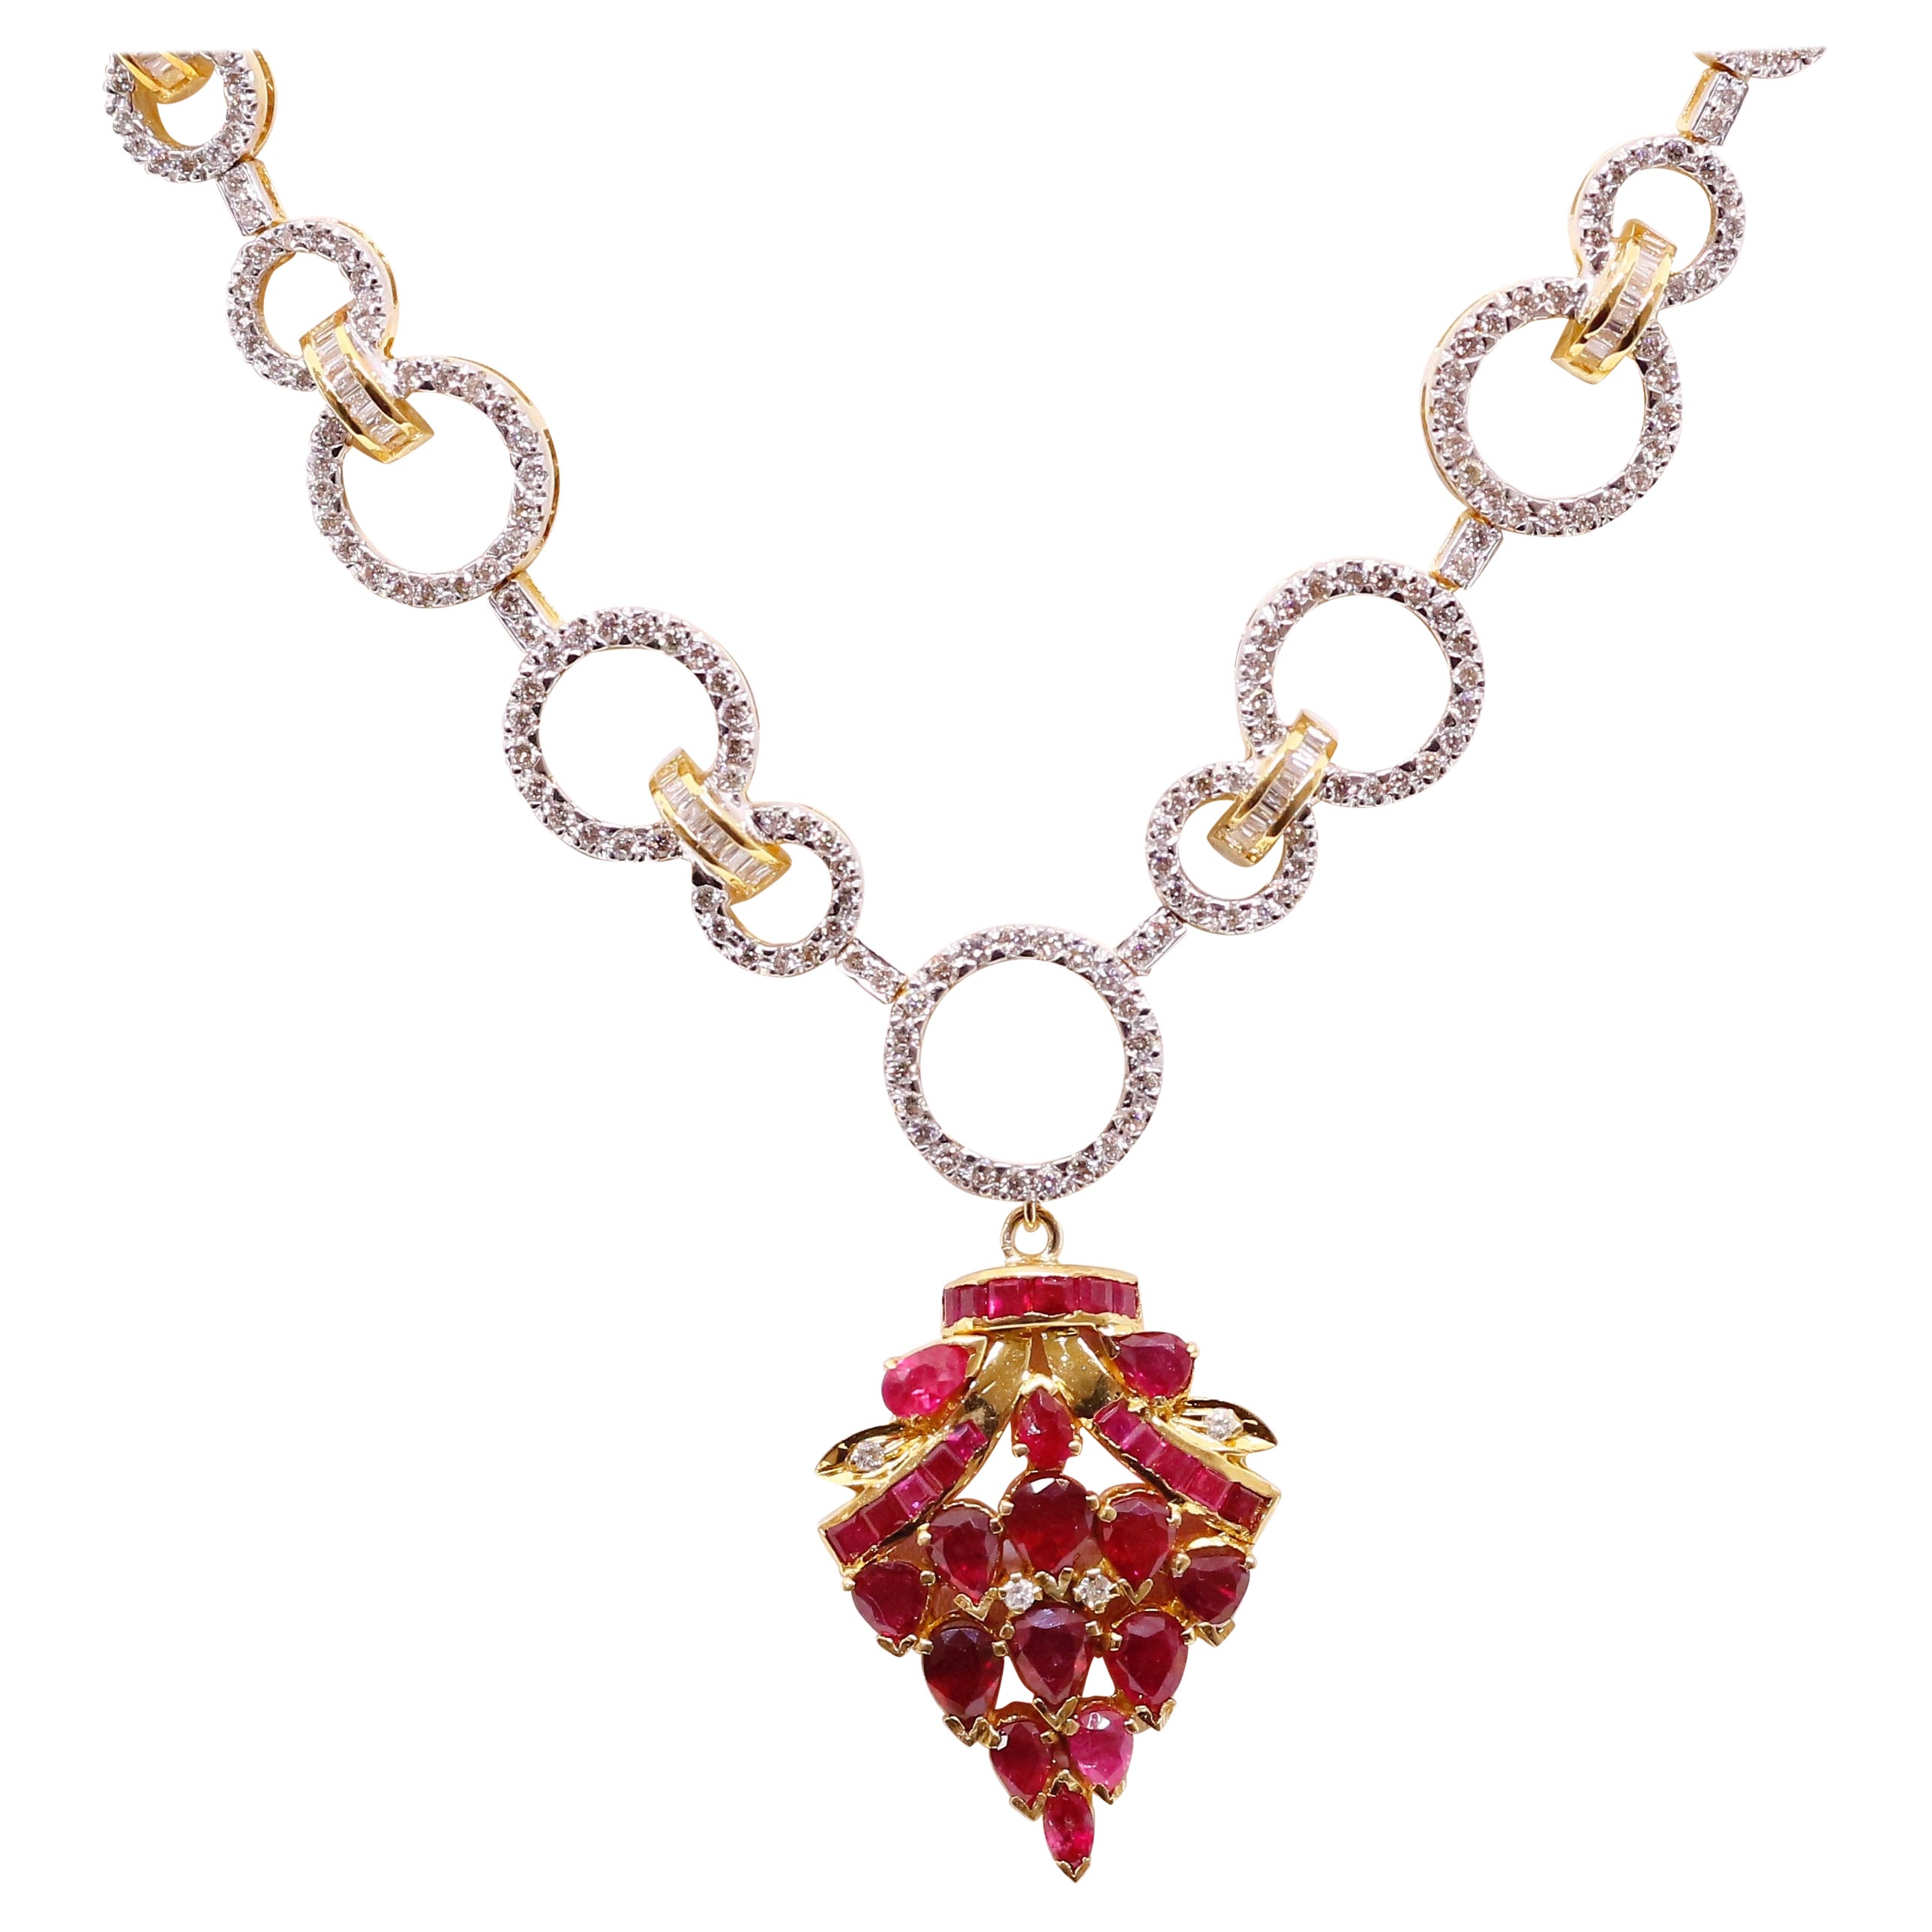 Ruby Bouquet Necklace: Pendant with Hoop Diamond Necklace